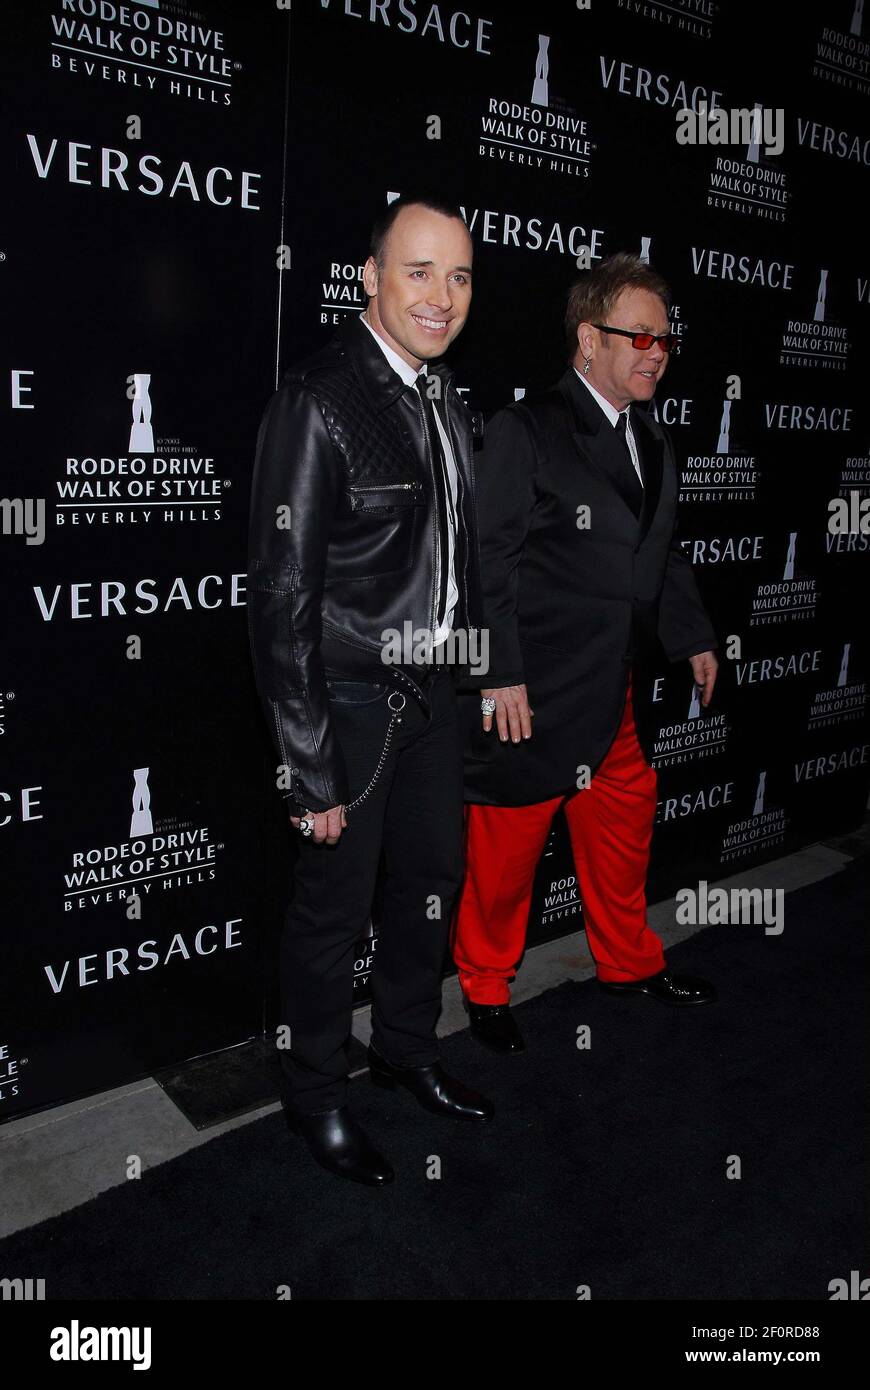 Elton John (R) and his partner David Furnish. 8 February 2007 - Beverly  Hills, California. Gianni And Donatella Versace Receive Rodeo Drive Walk Of  Style Award at the Beverly Hills City Hall.